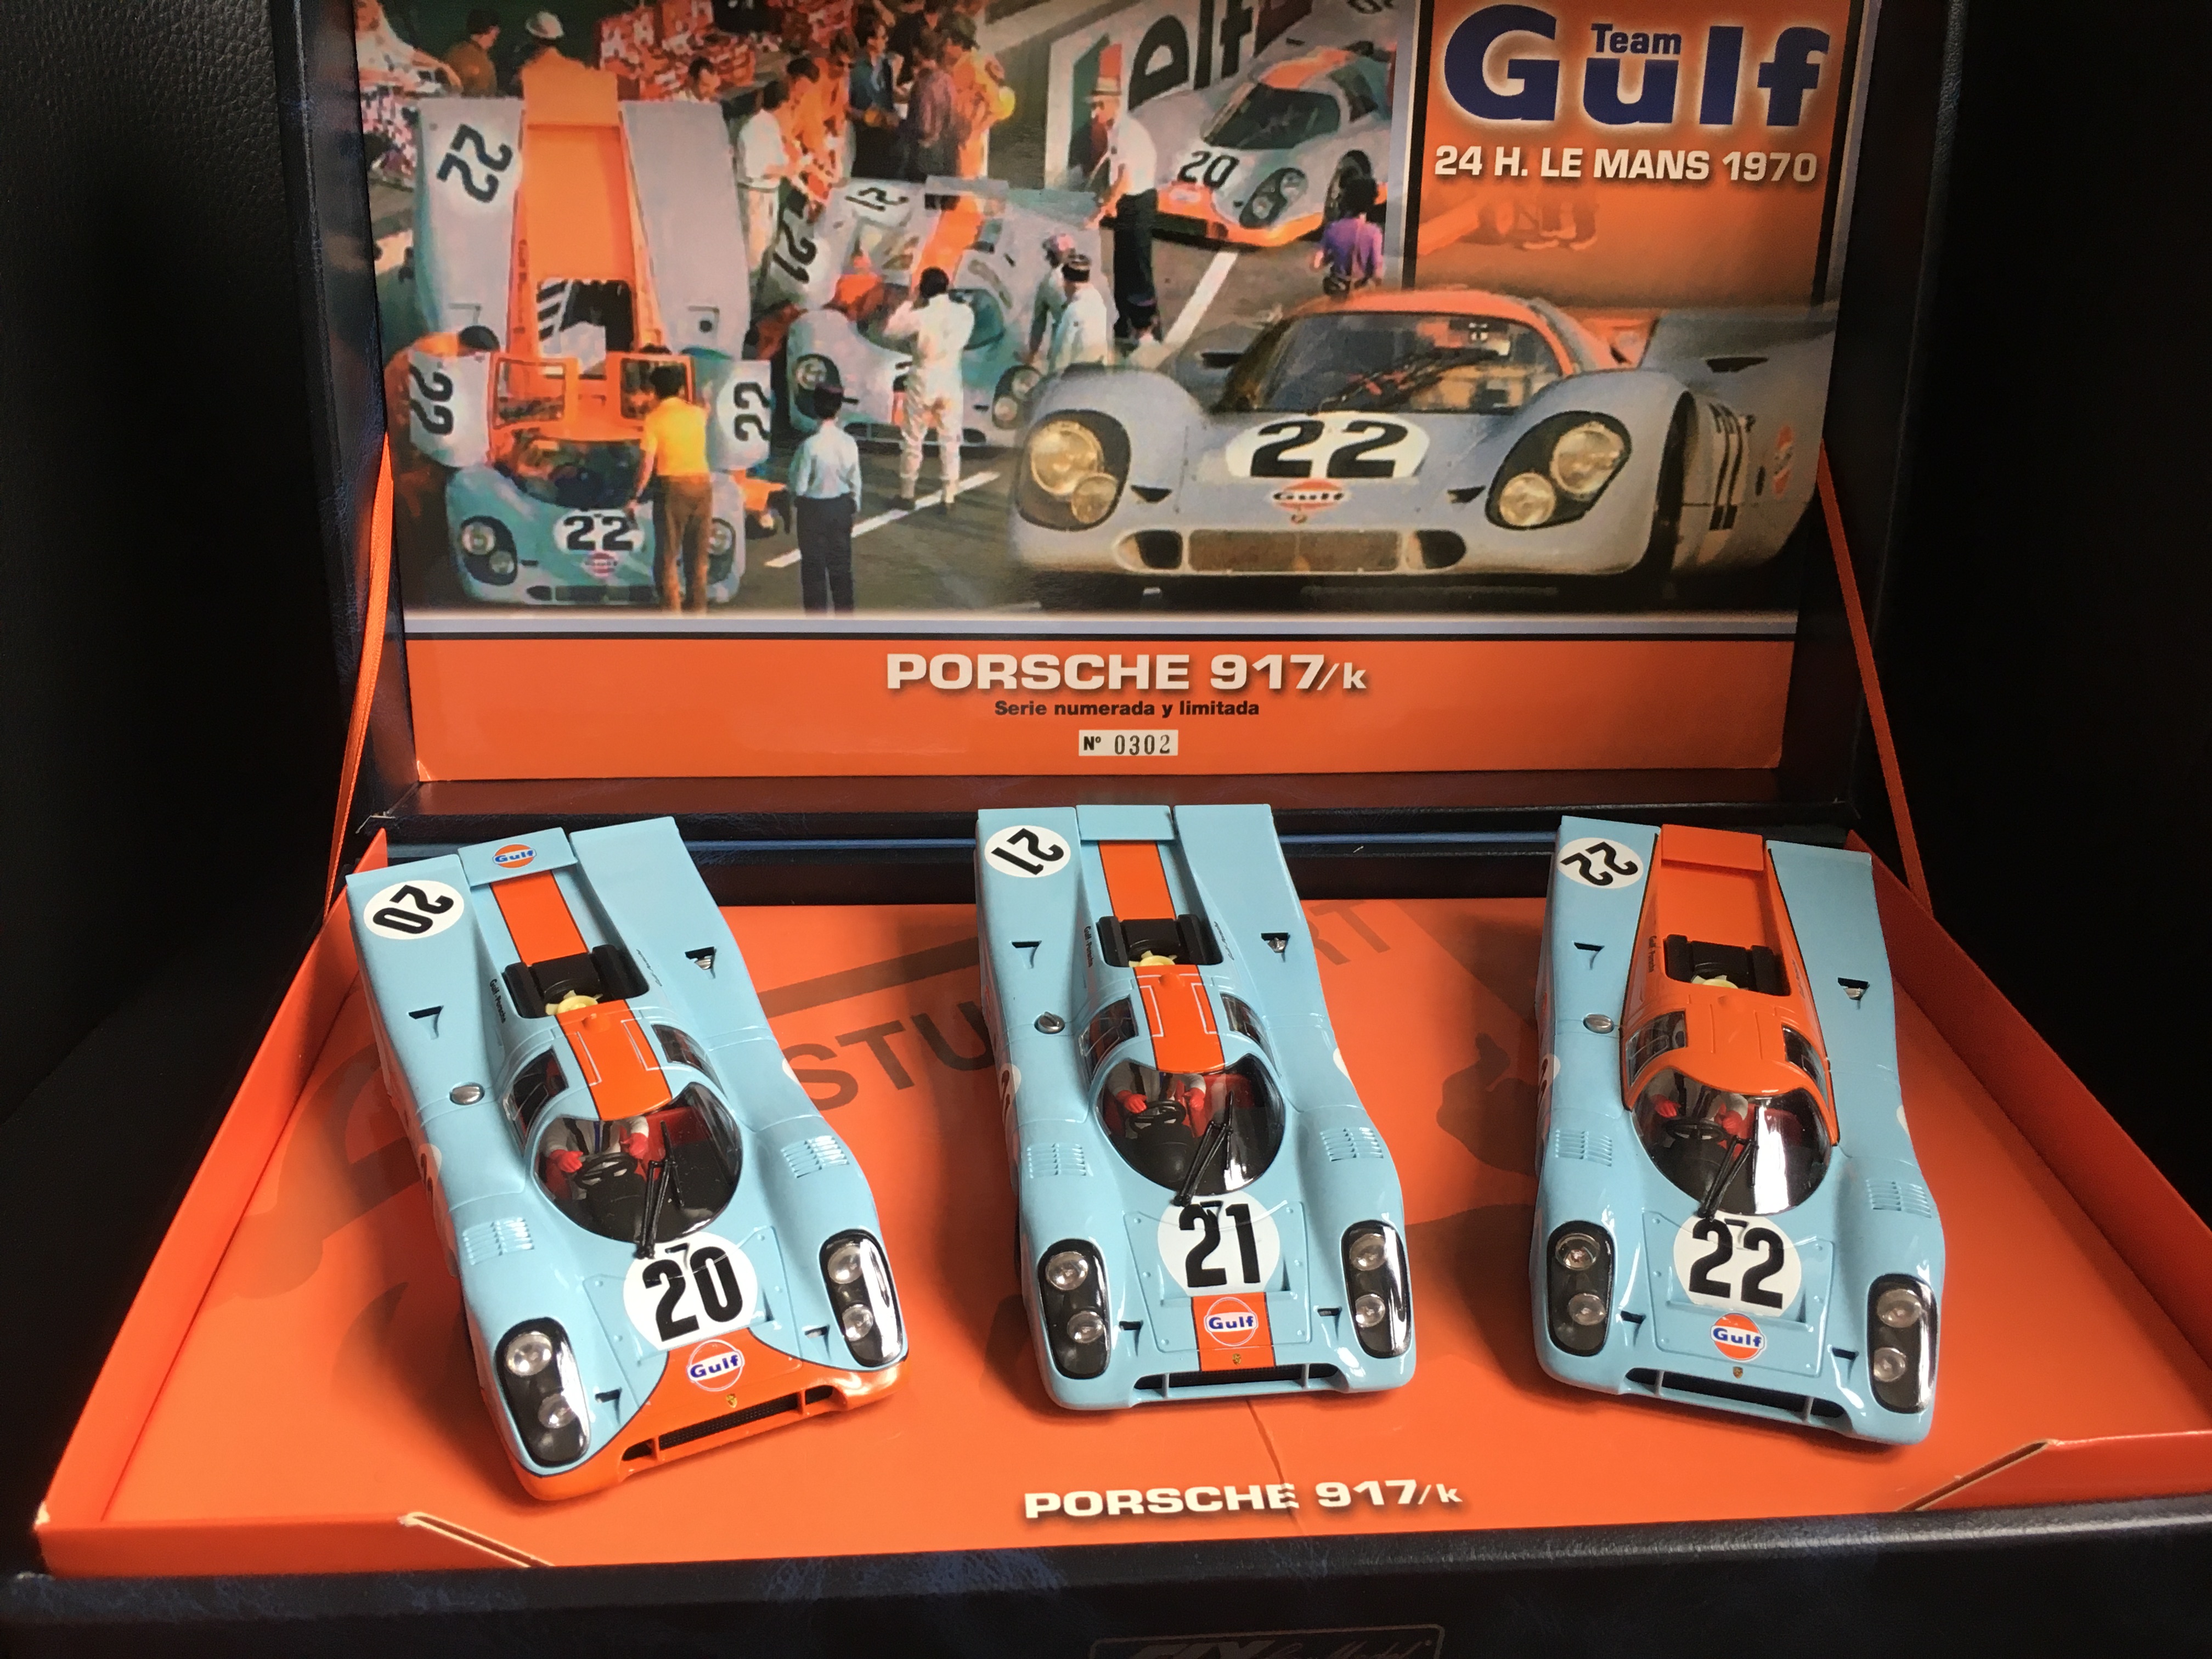 1/32 Fly Porsche 917 Chassis fits Slot.it SW Pod (TEWPTZ3B2) by CG_Slotcars